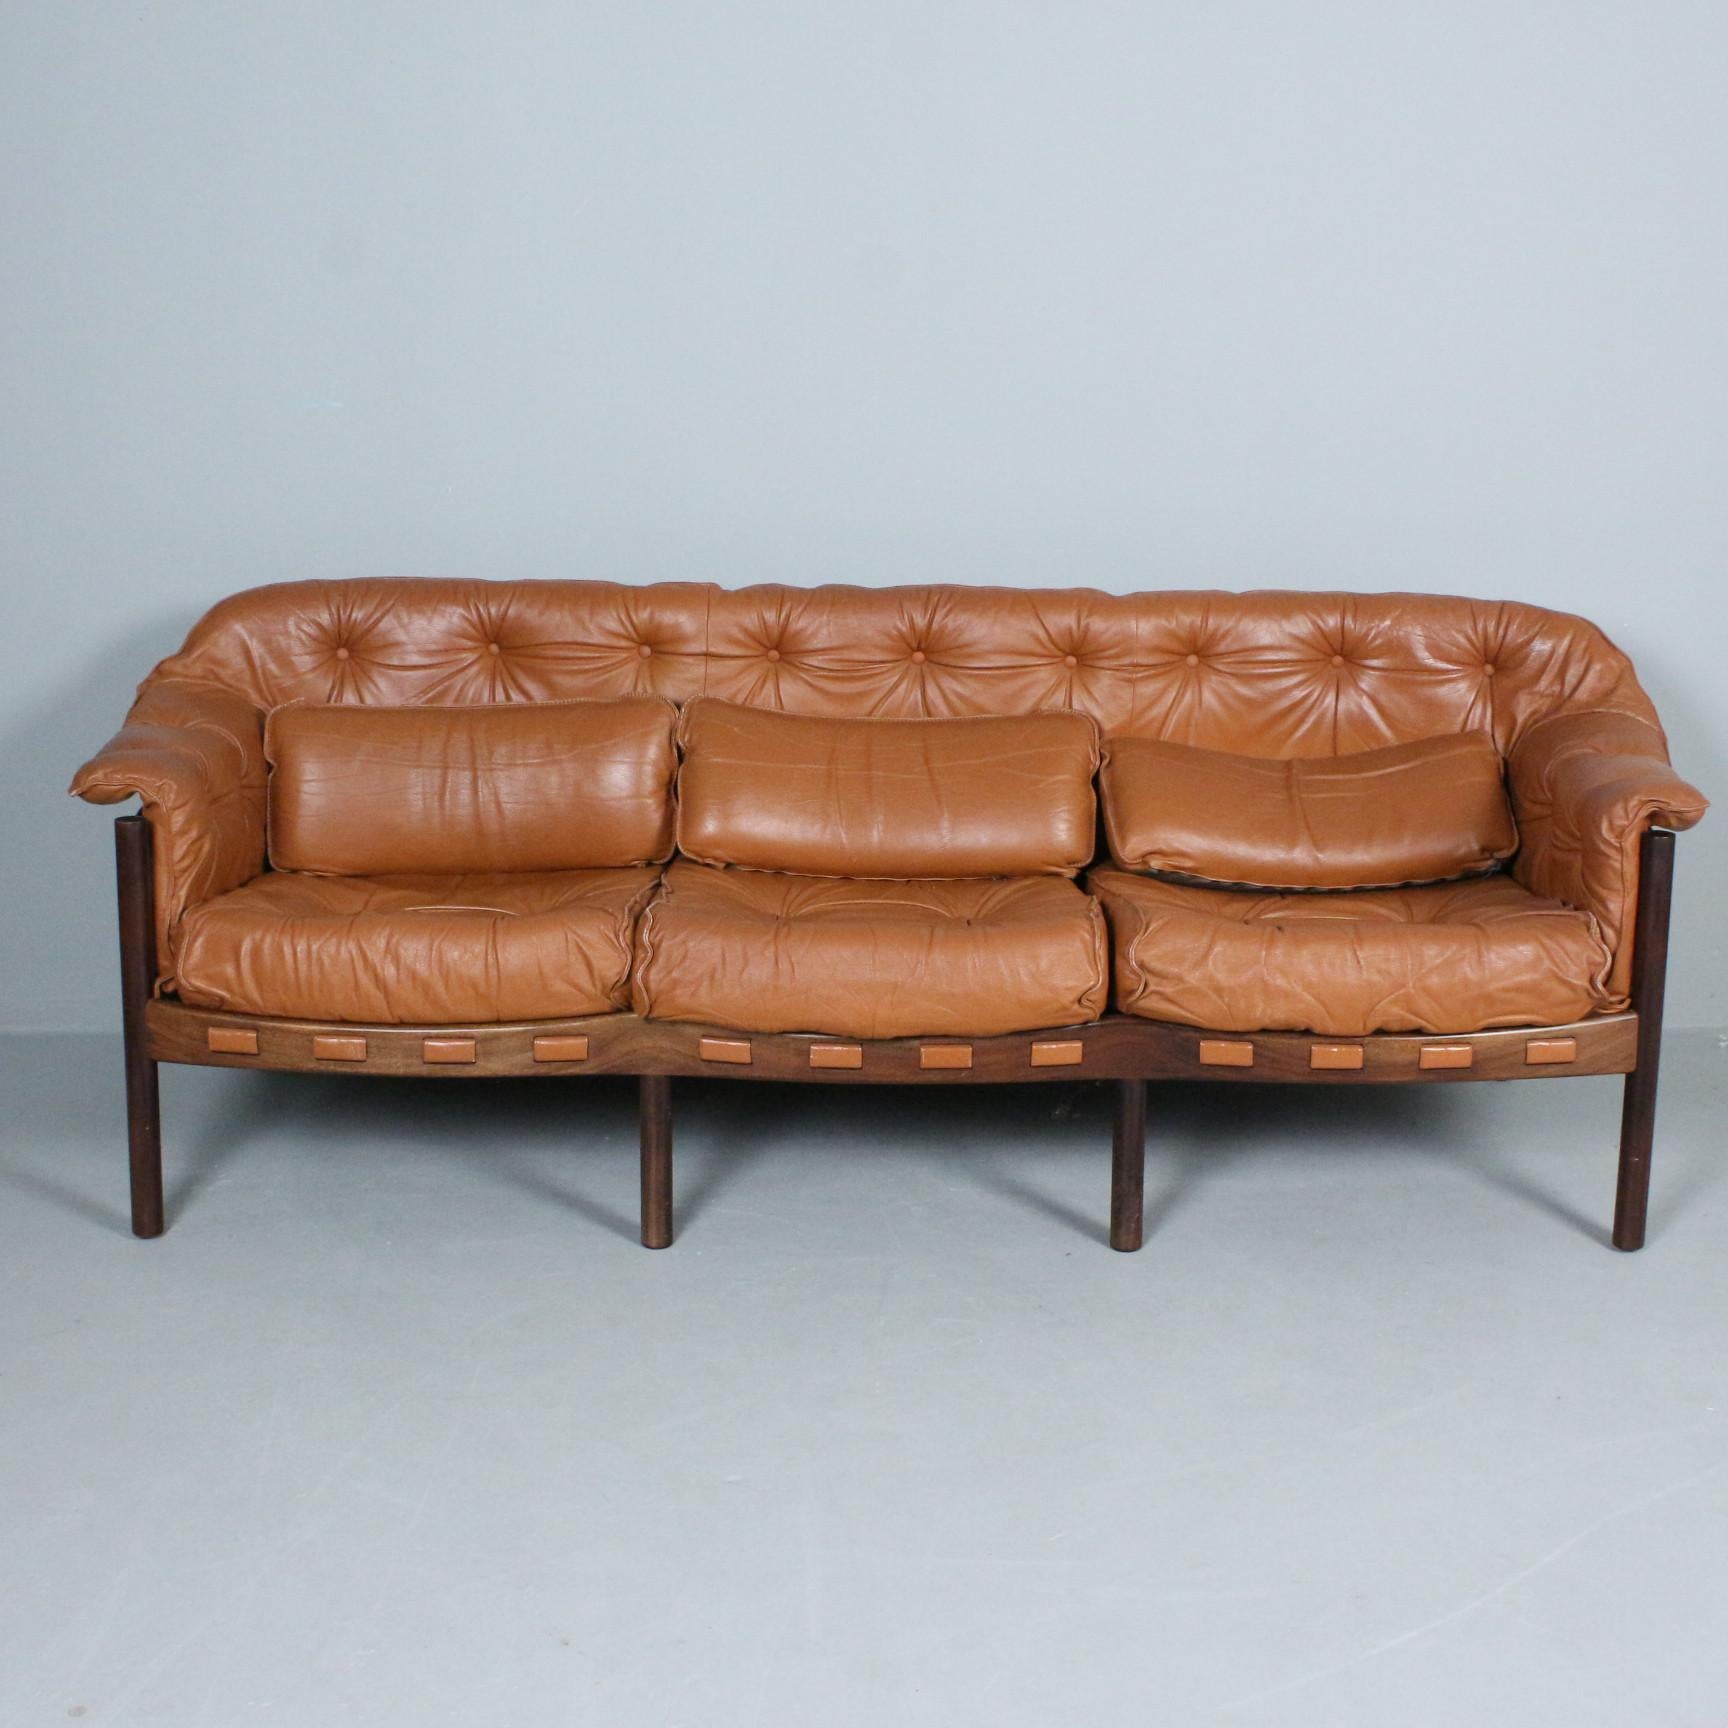 Arne Norell 3 seats Sofa  in Brown leather and wood for Coja made in Sweden around 1960
Good overall condition,
 2 matching model Armchairs/loungechairs available
Price for 1 sofa
